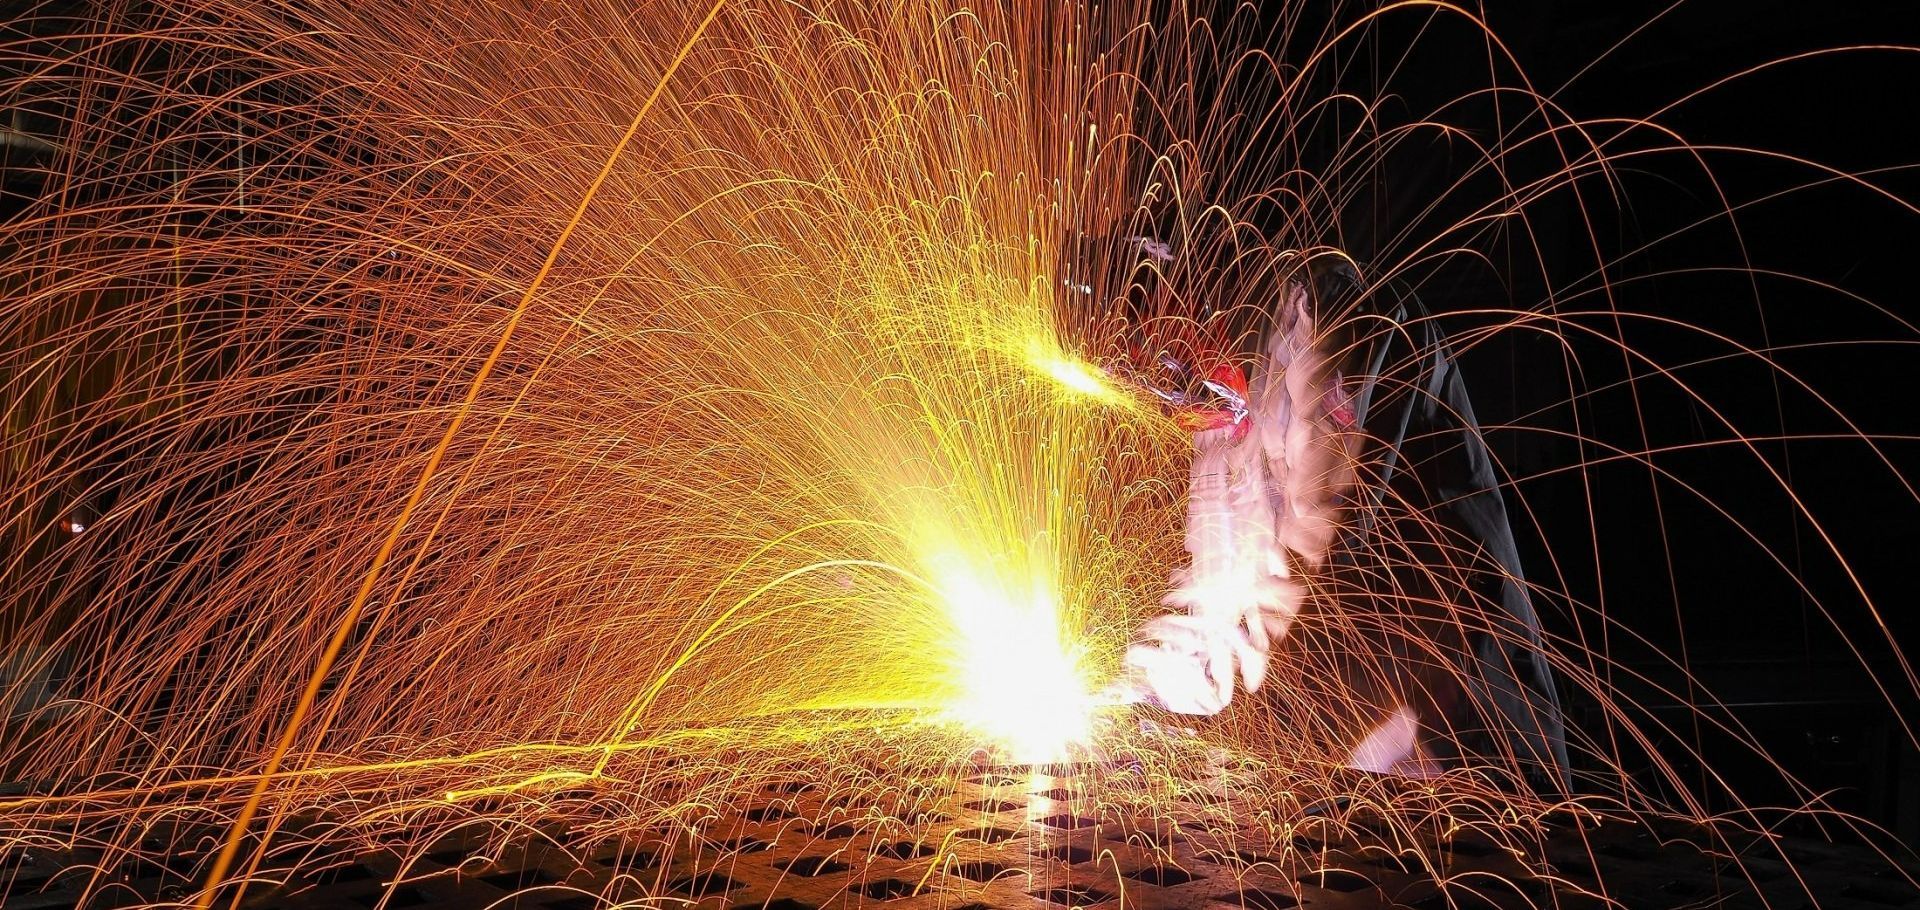 sparks from cutting metal